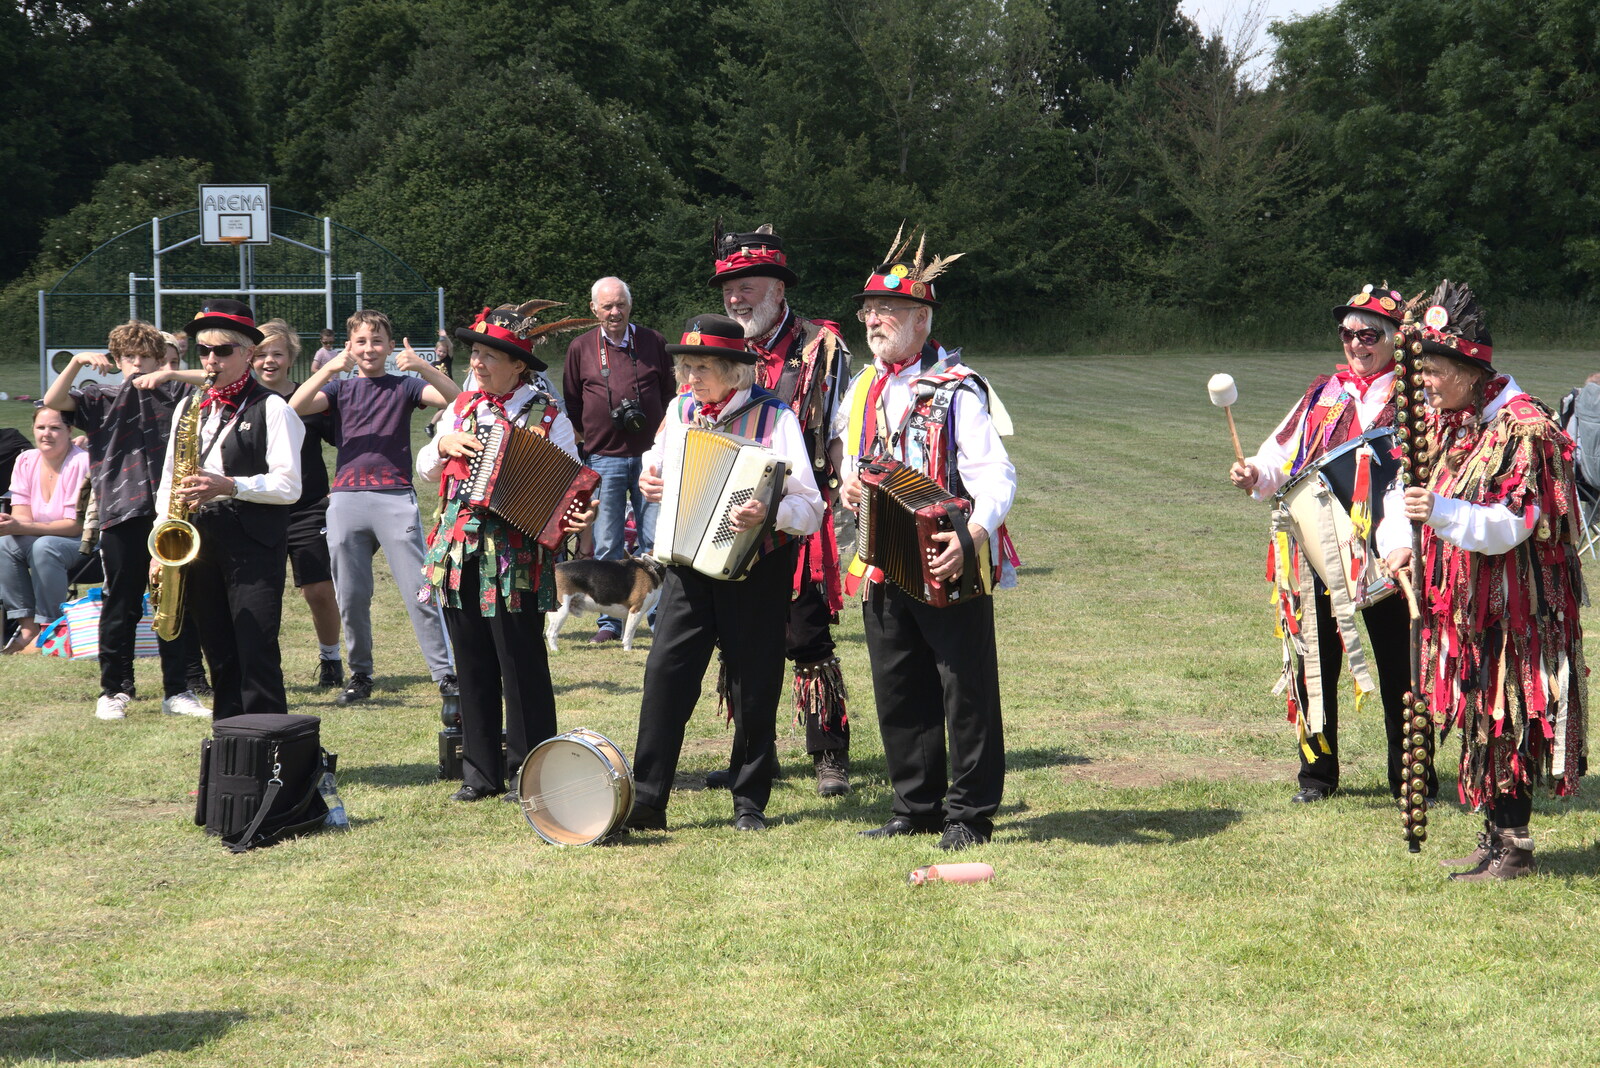 The Morris band starts up from The Gislingham Silver Band at Barningham, Suffolk - 3rd June 2022